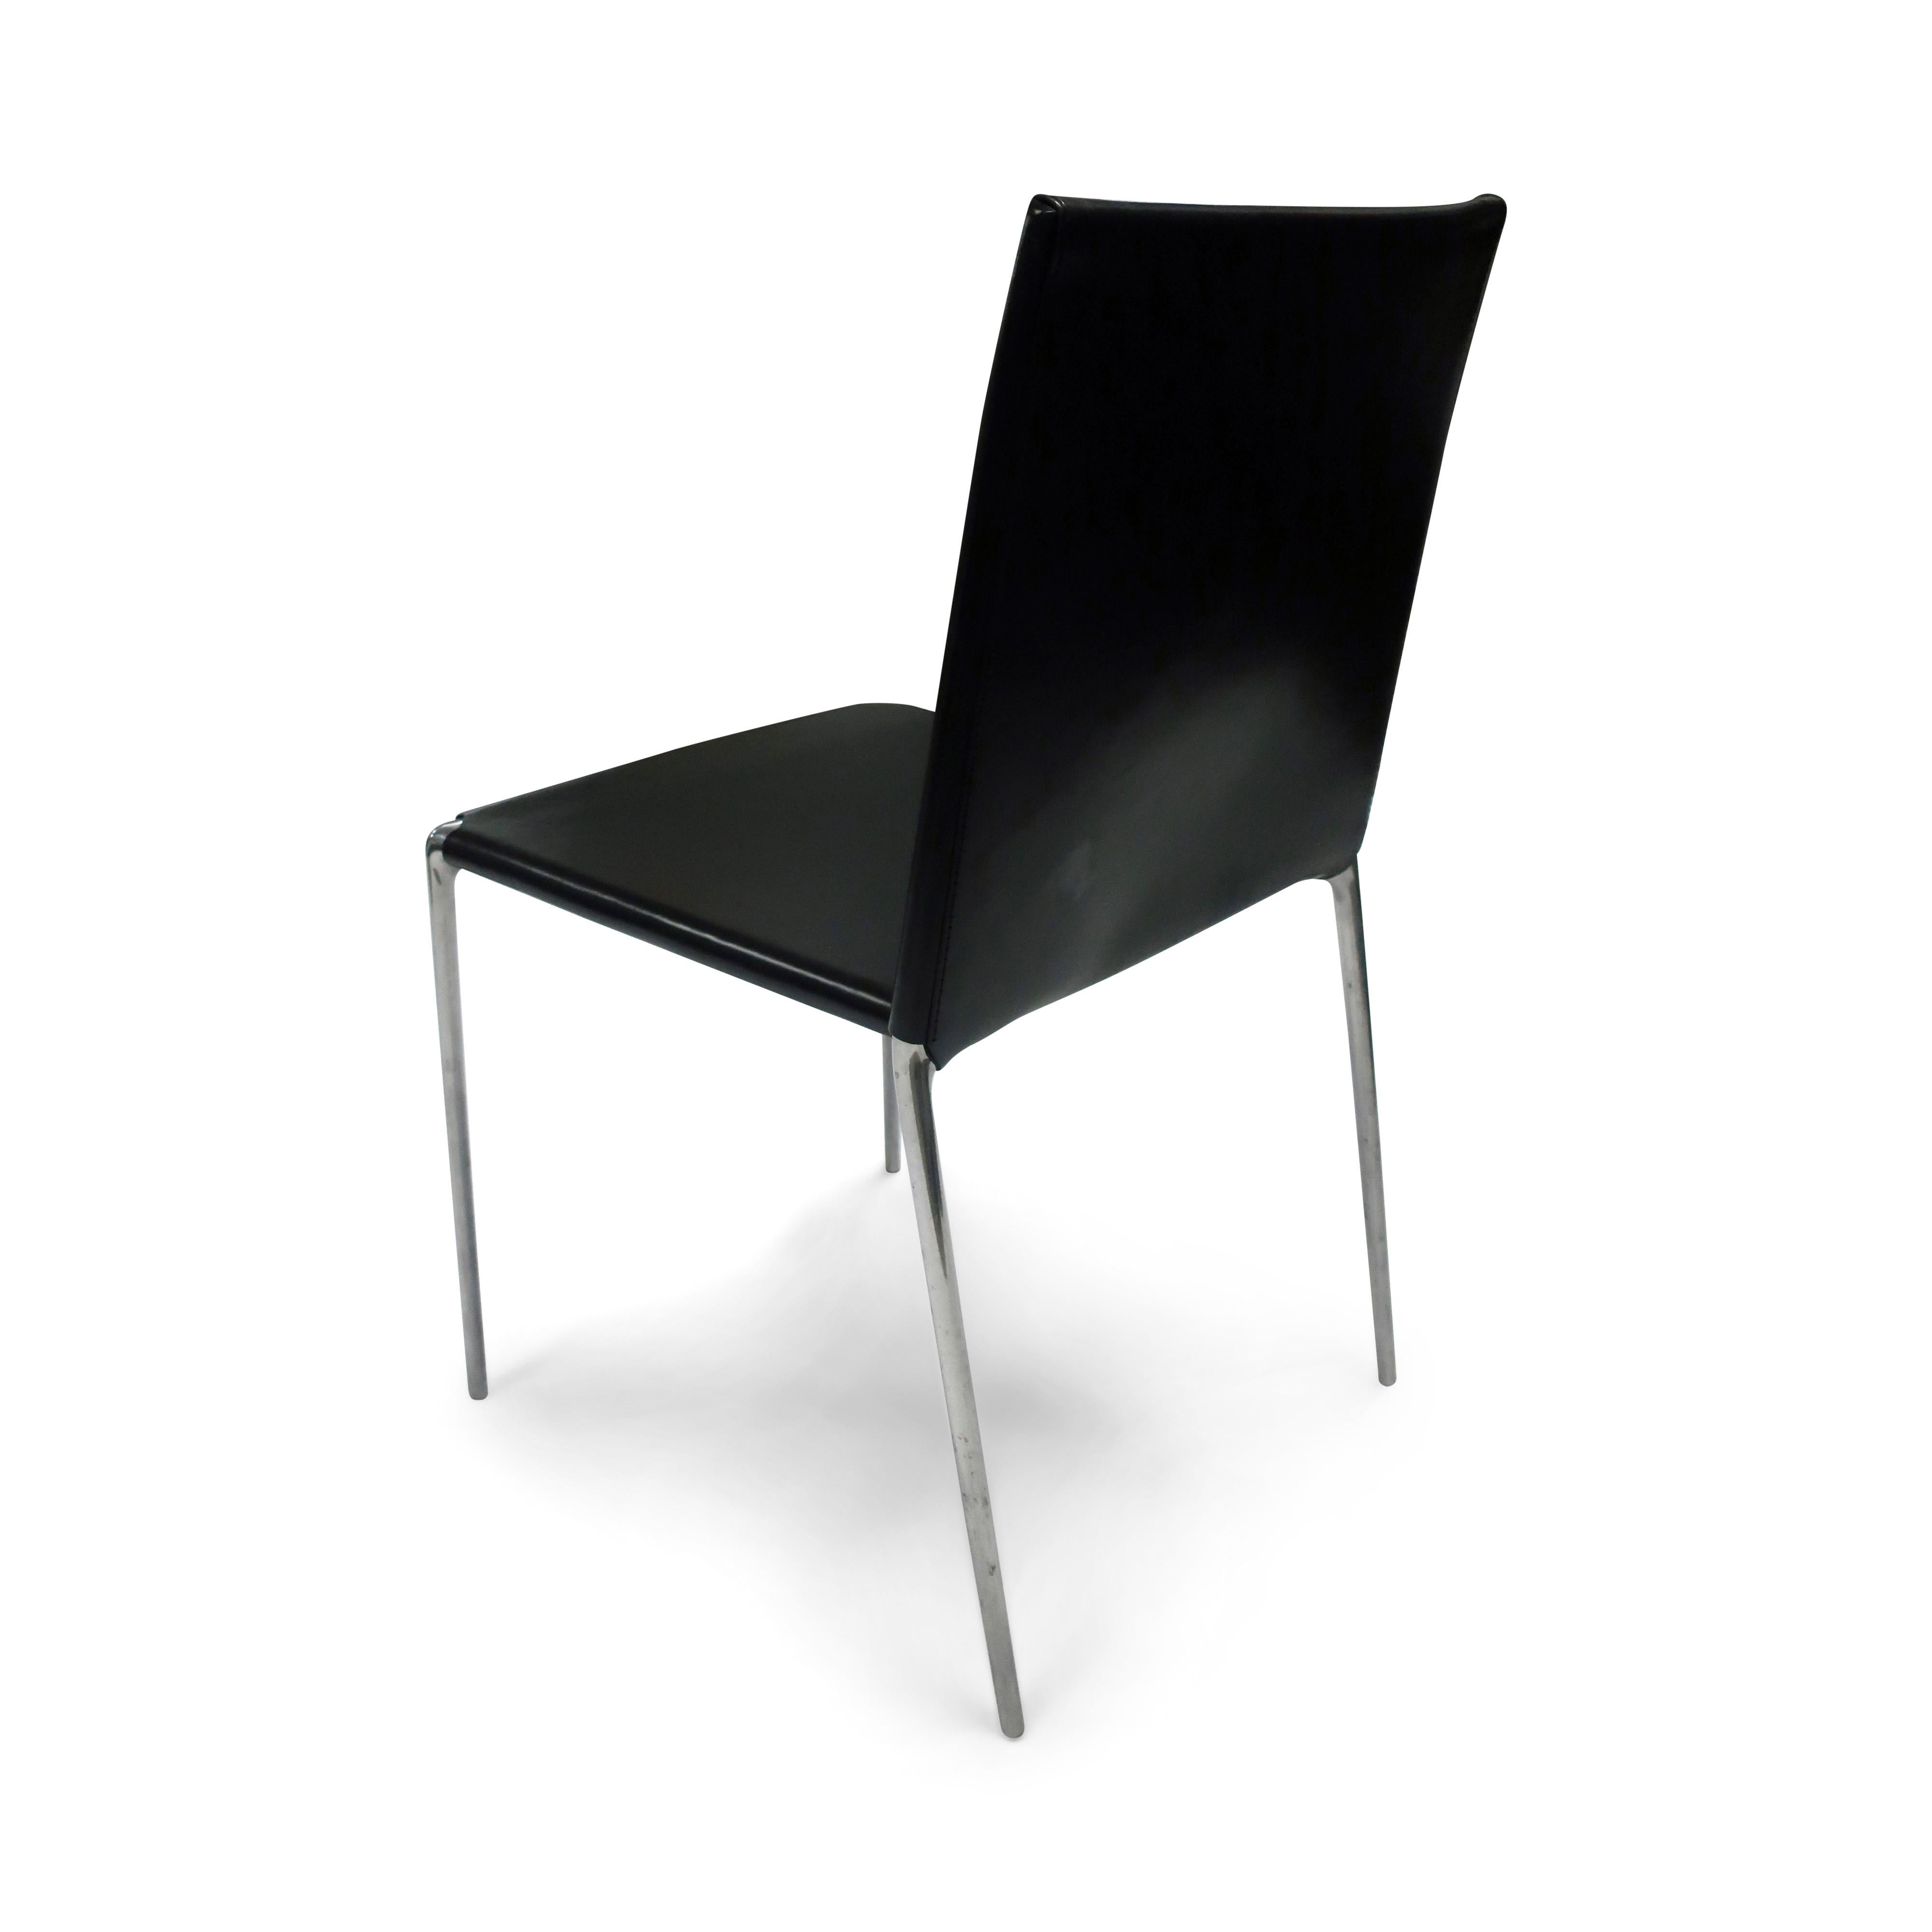 Similar to his classic Lia chair for Zanotta, Roberto Barbieri’s late 1990s-early 2000s design for the Alma chair is perfect in its simplicity: polished aluminum metal frame, black leather seat and back covering, and versatile enough to be used as a